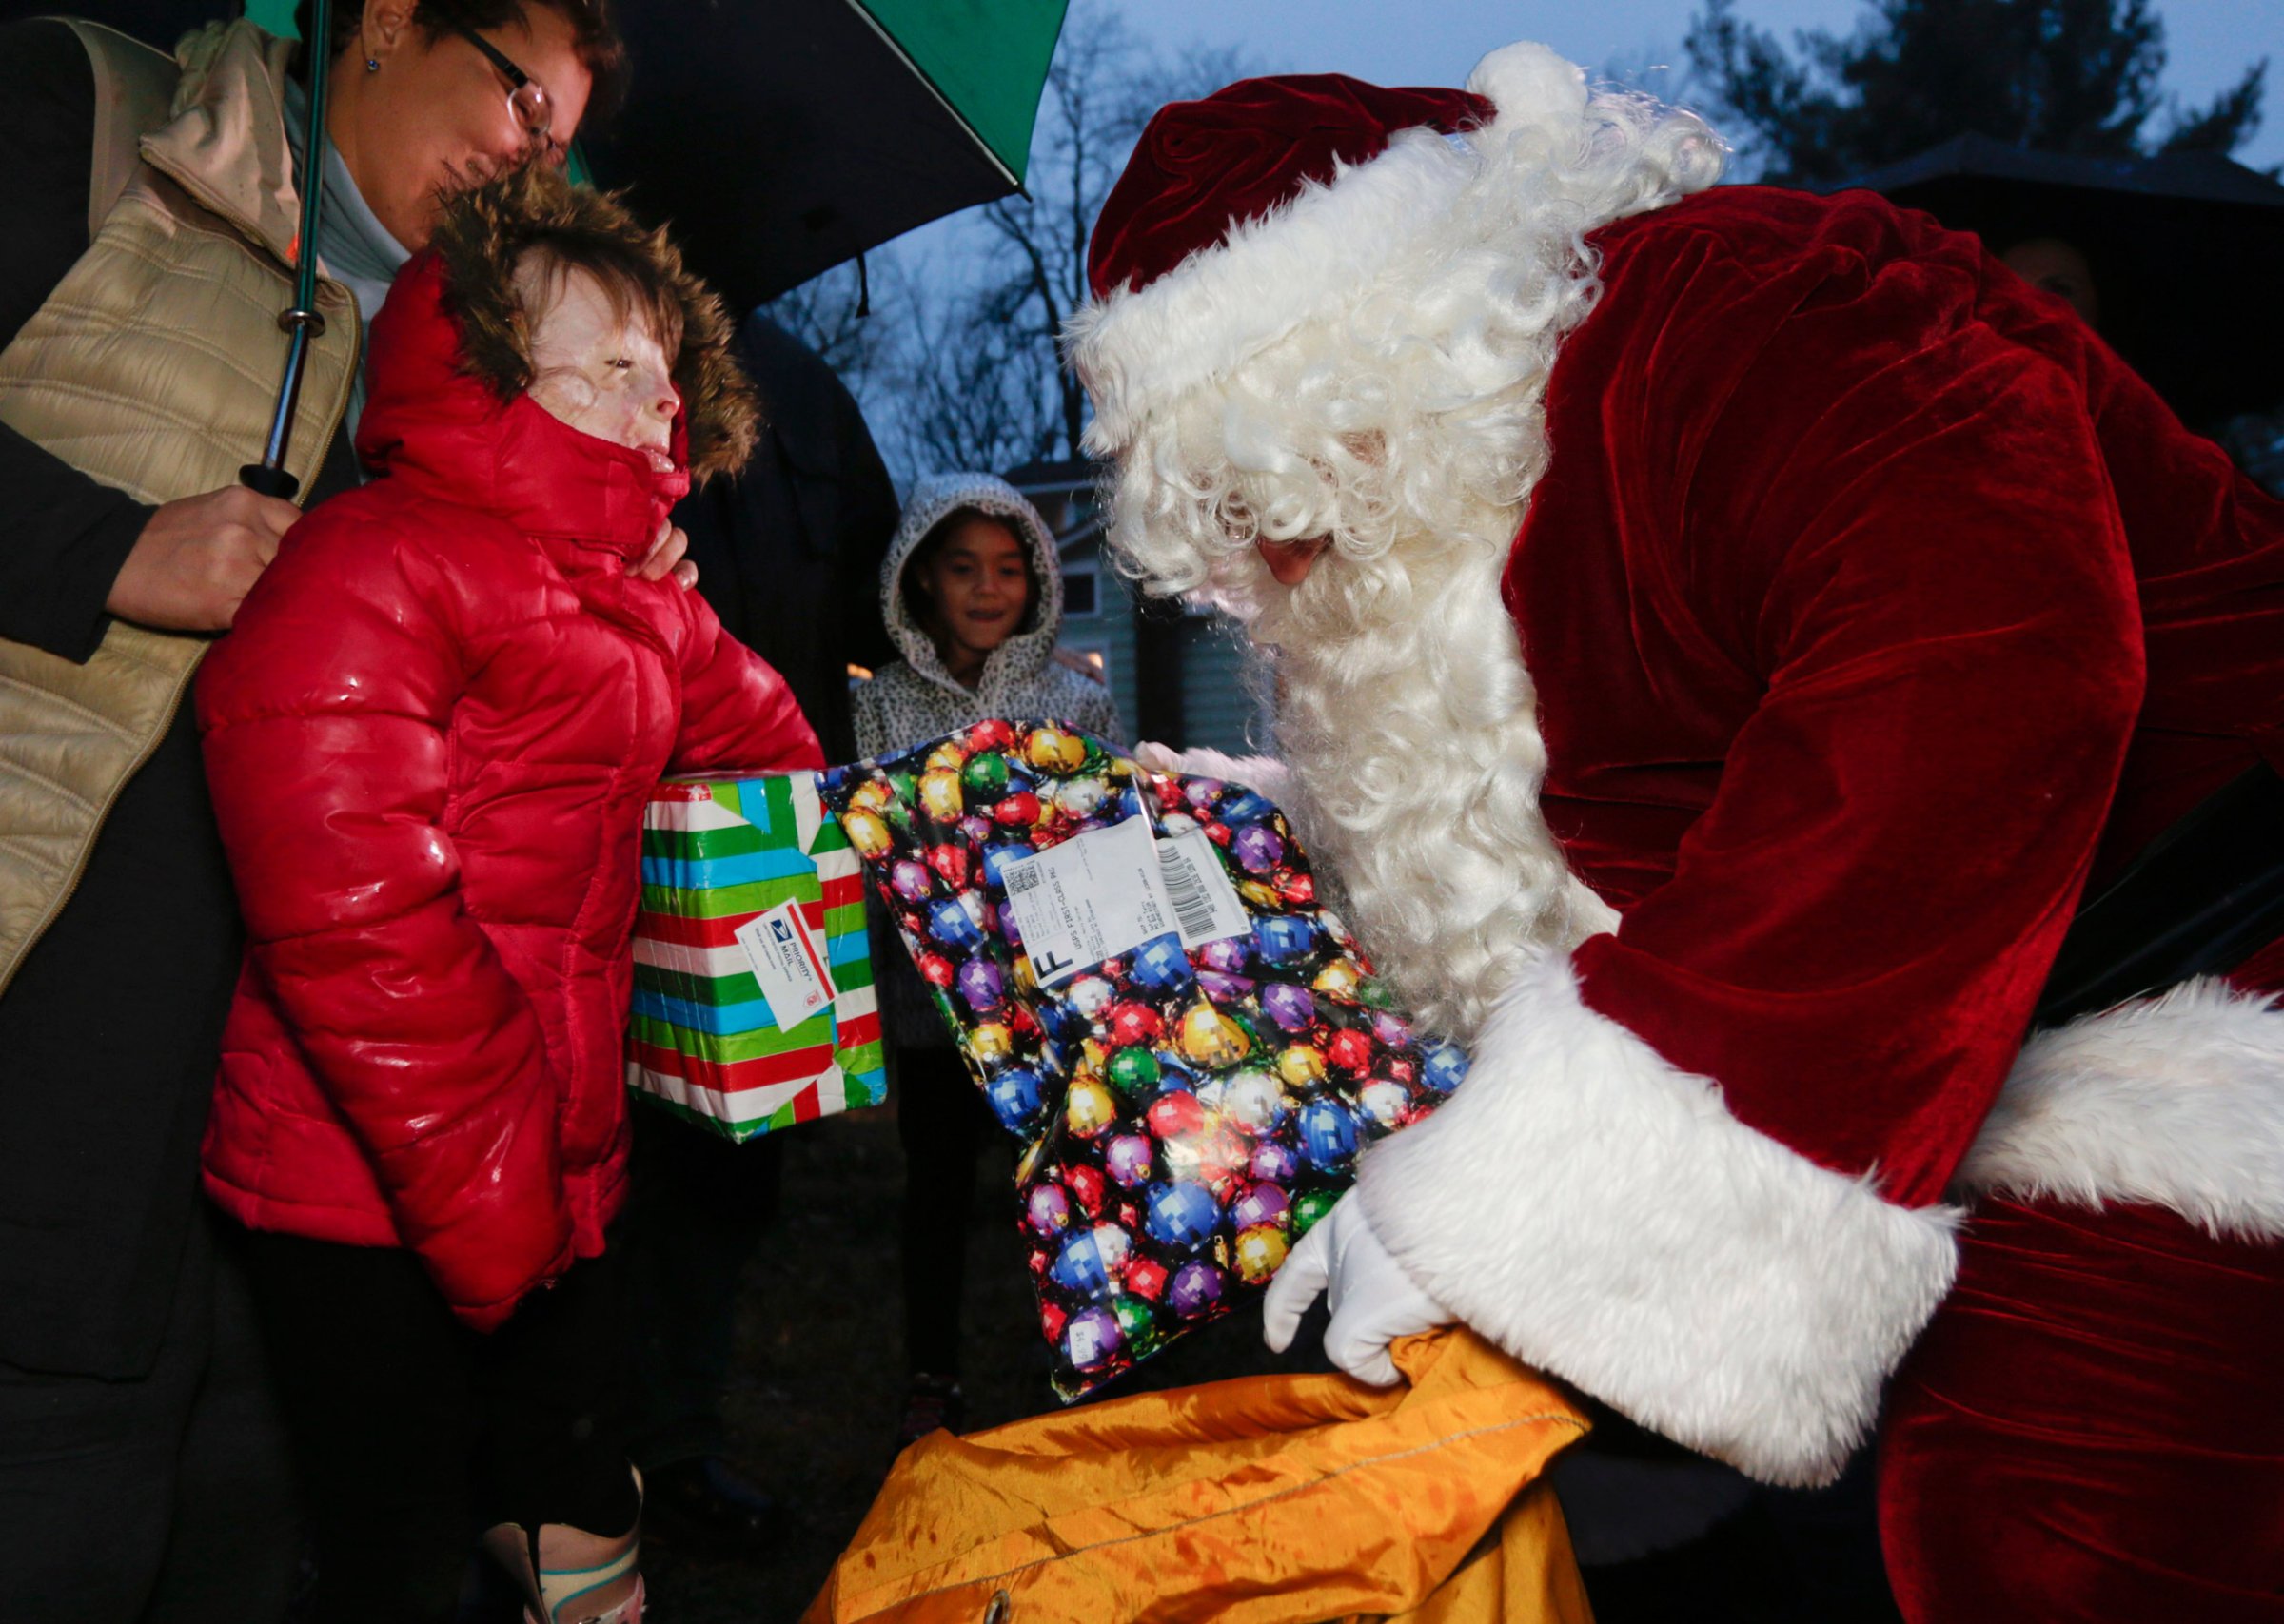 FILE - In this Dec. 17, 2015, file photo, Safyre Terry receives packages from Santa Claus in Rotterdam, N.Y. Terry, who lost her father and siblings in an arson fire that left her severely scarred is sharing the good cheer bestowed on her by the truckload since her simple Christmas wish went viral. (AP Photo/Mike Groll, File)